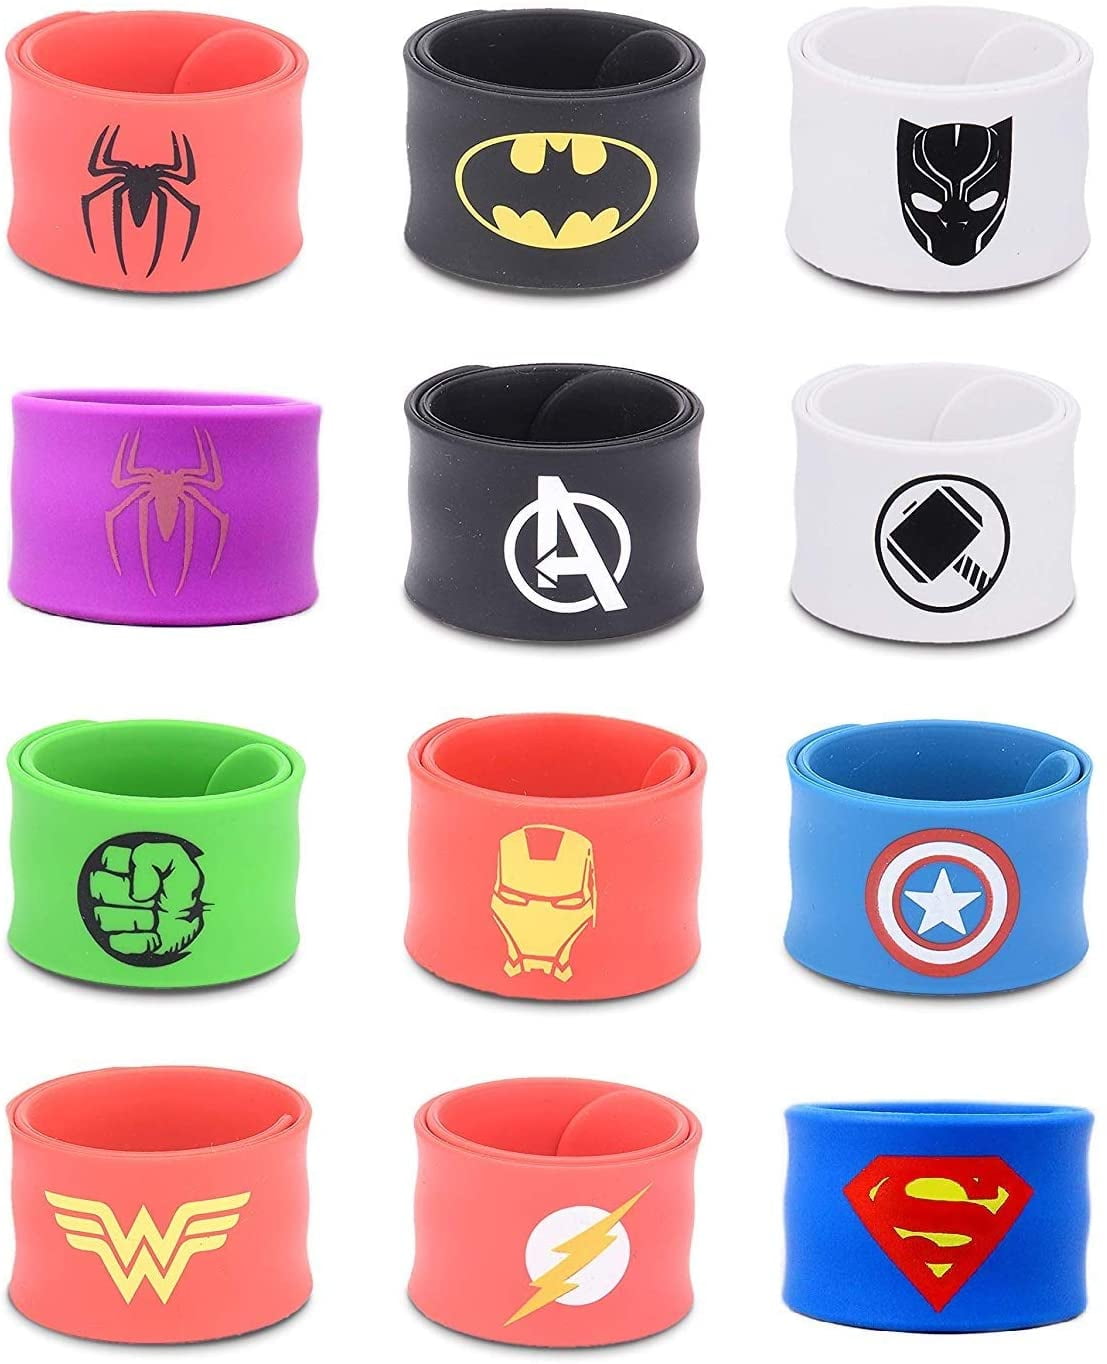 Hooggle 18 Pack Superheroes Wristbands Slap Bands Party Supplies Snap Bracelets Party Bag Fillers Bracelet Bands for Kids Boys Adults Birthday Kids Superhero Party Favors Toys 